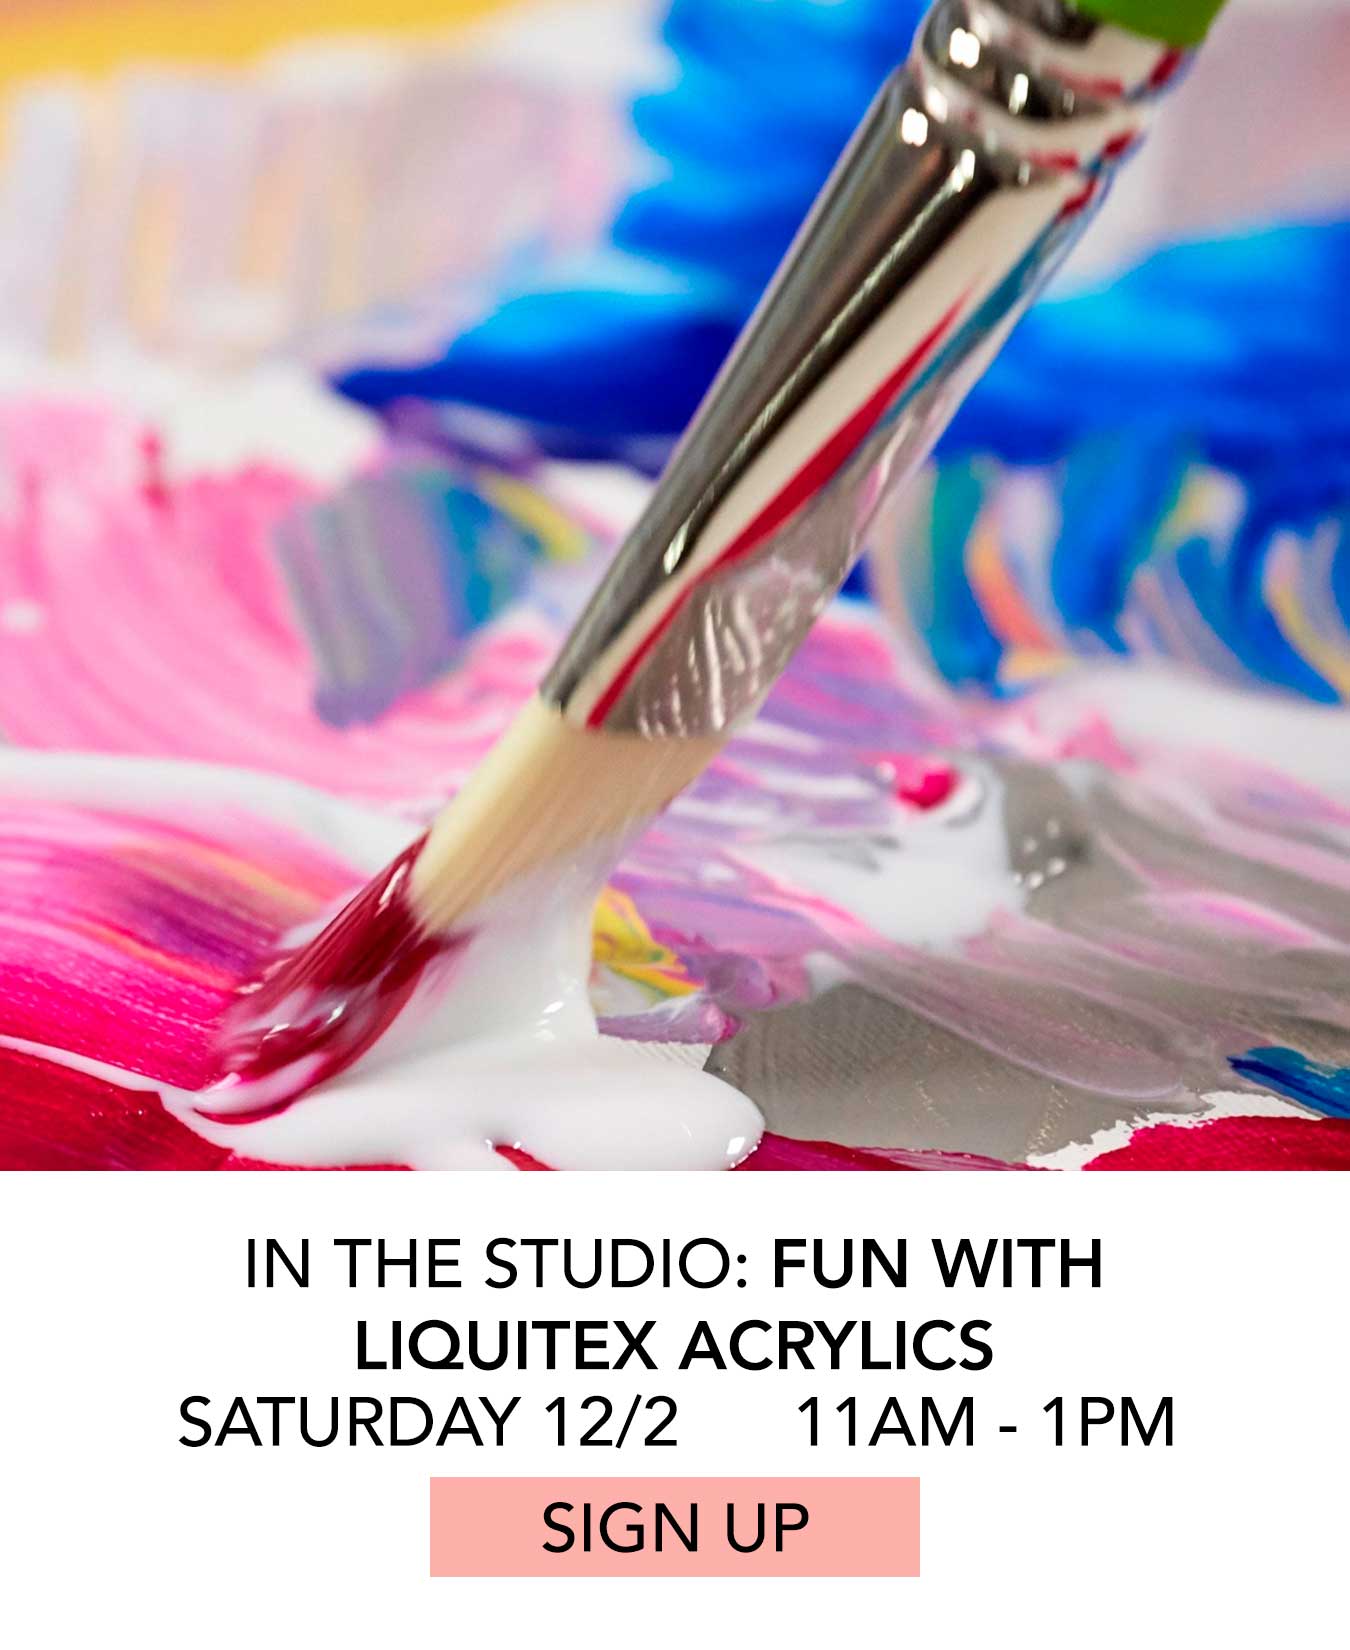 In the Studio: Fun with Liquitex Acrylics. Saturday 12/2 from 11:00am to 1:00pm. Click to Sign Up.